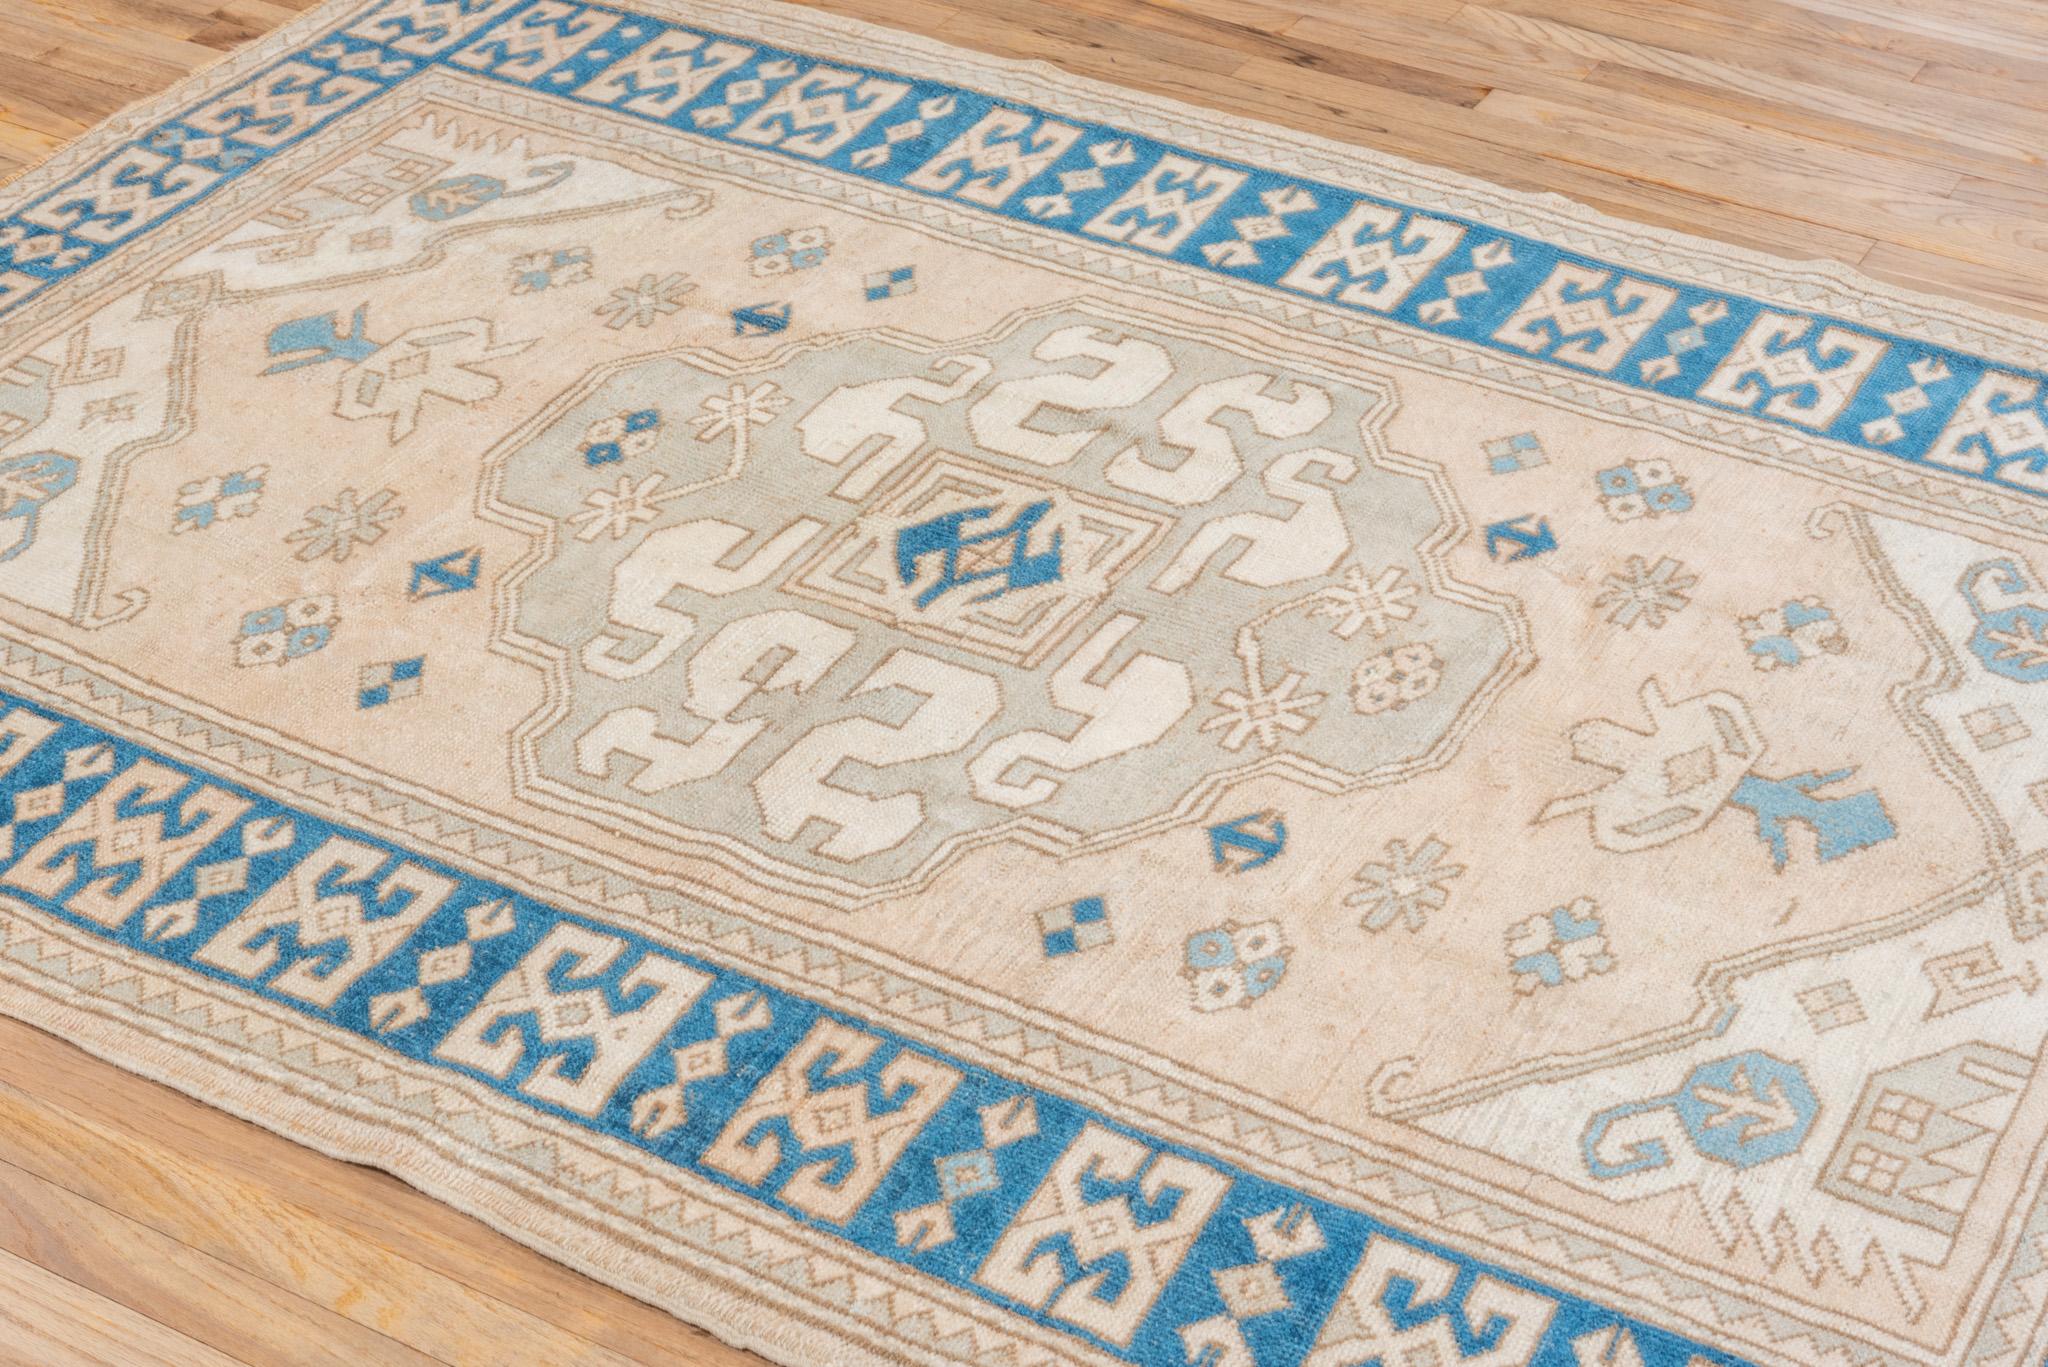 Oushak rugs have a long history dating back to the 15th century during the Ottoman Empire. They gained popularity in Europe during the 16th and 17th centuries, particularly in France and England, where they were sought after by aristocrats and